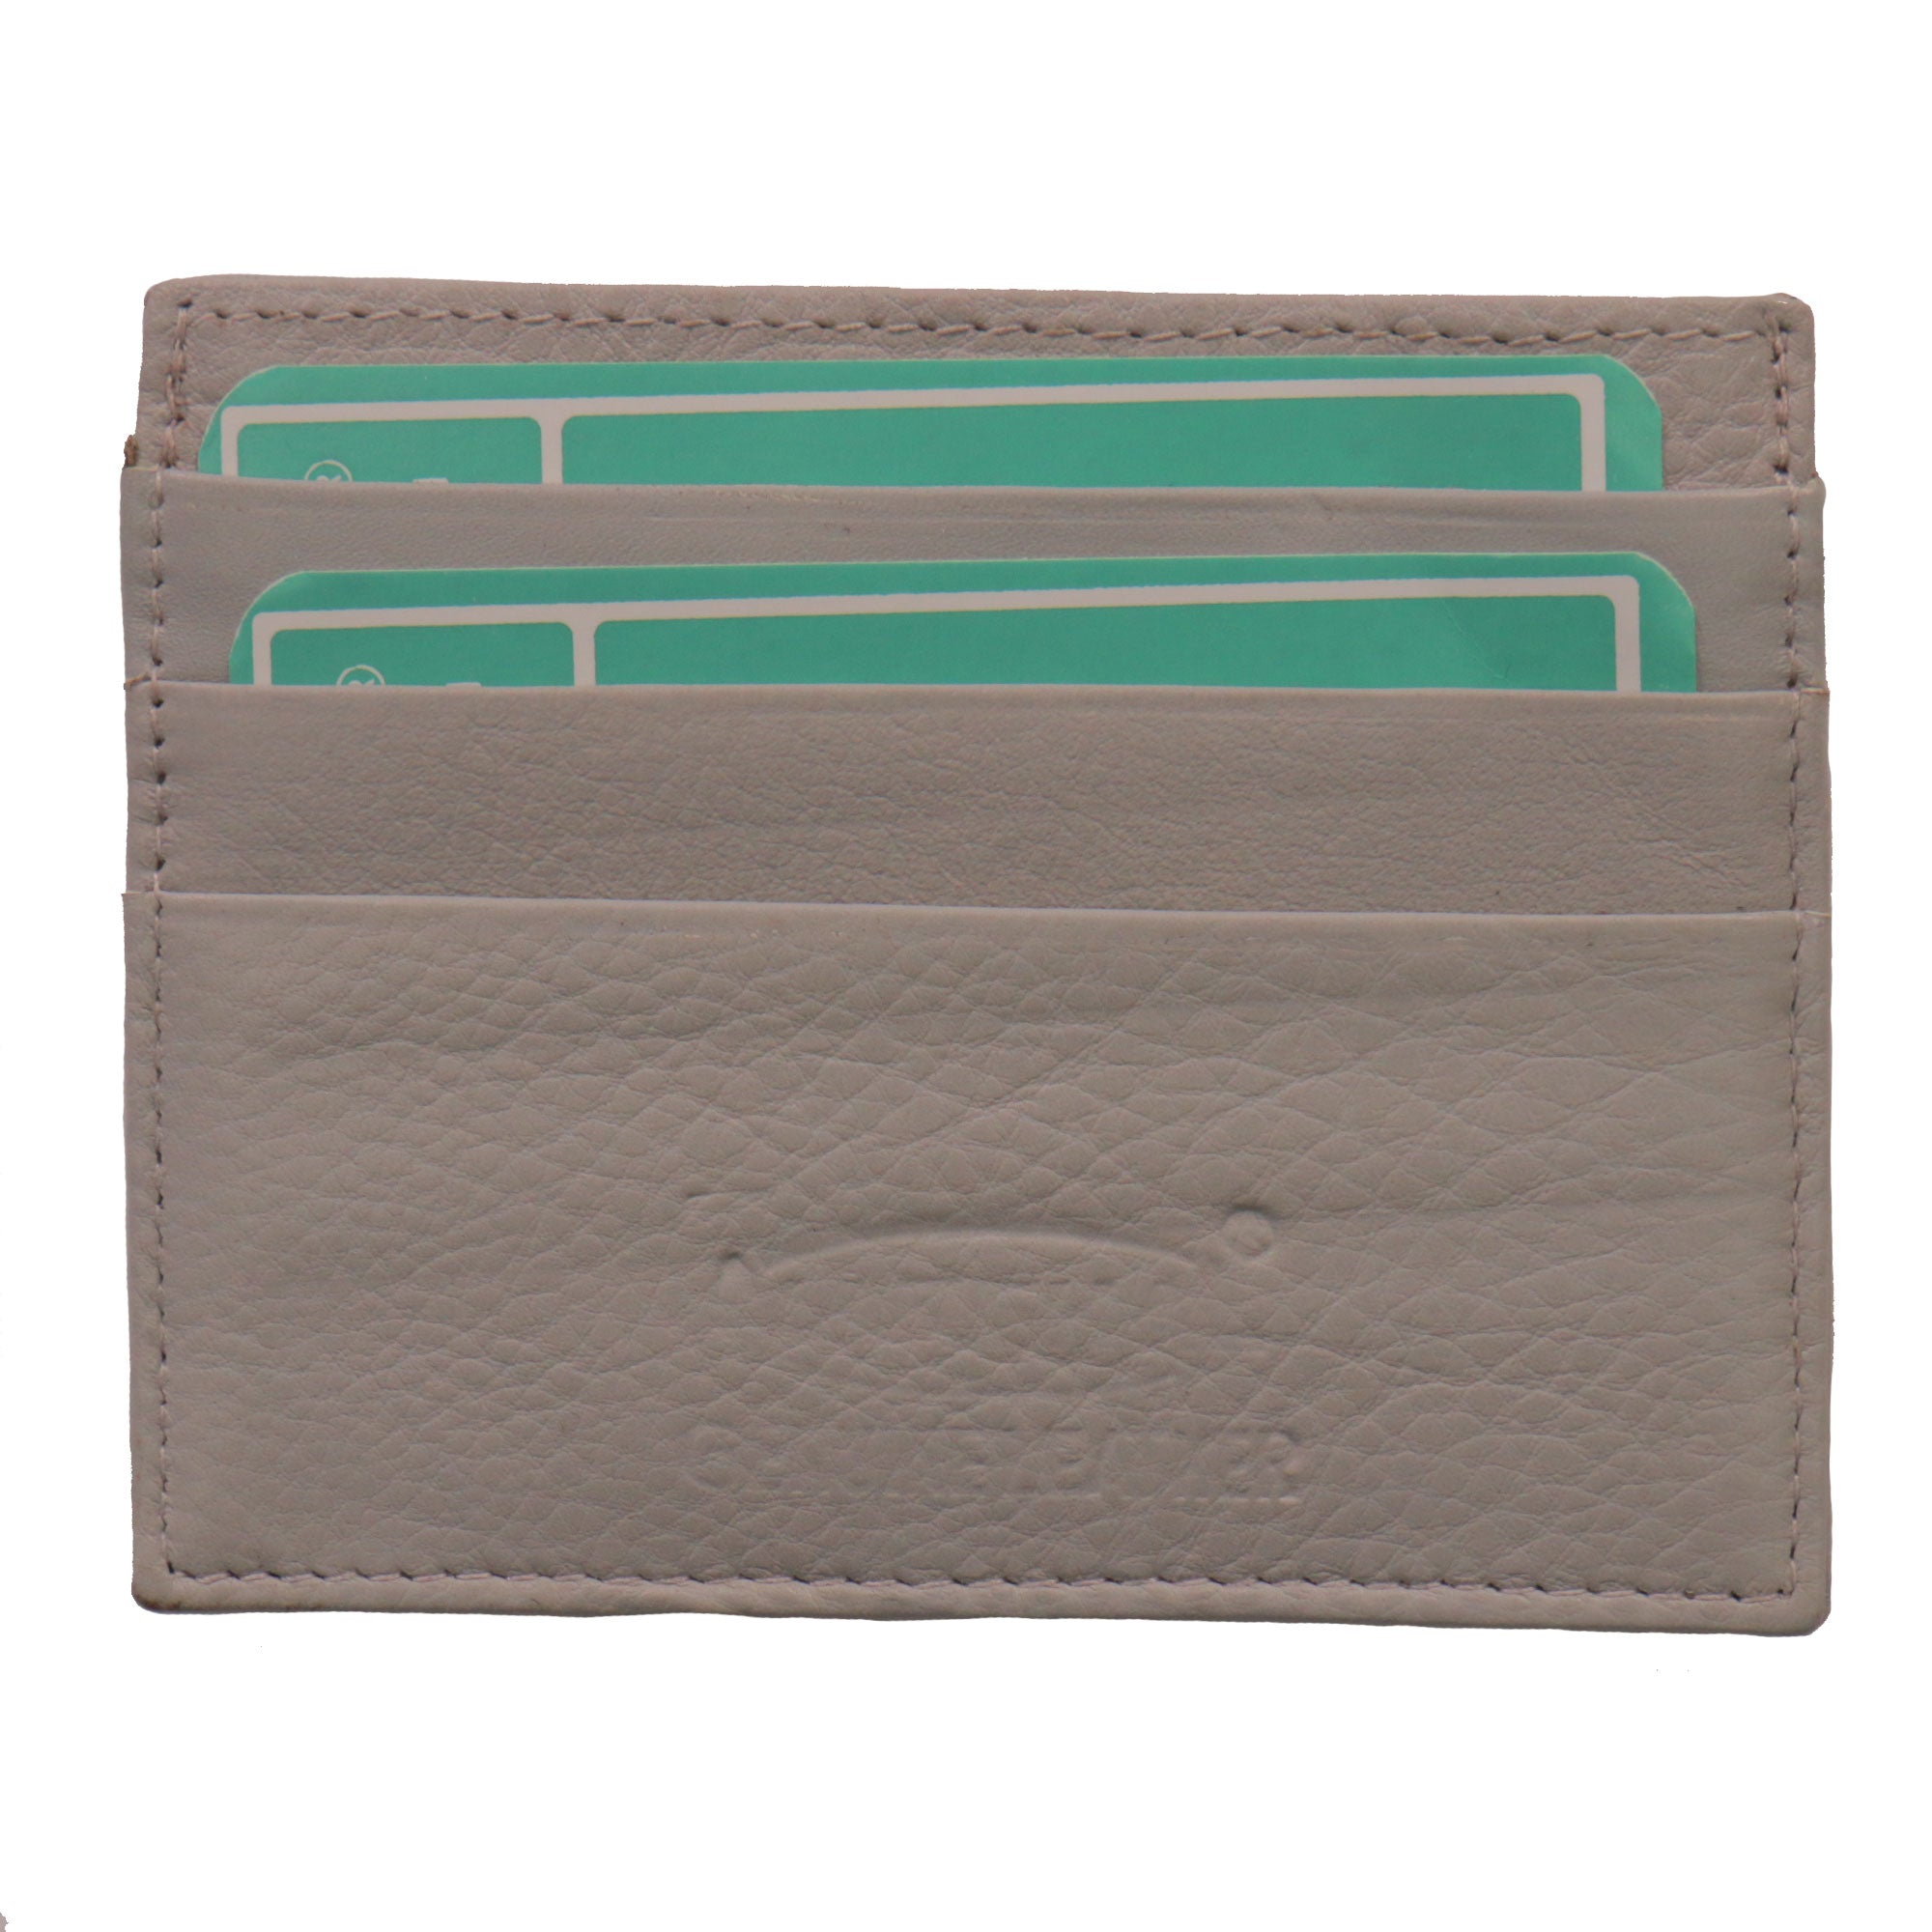 Hot Leathers Grey Credit Card Holding Wallet